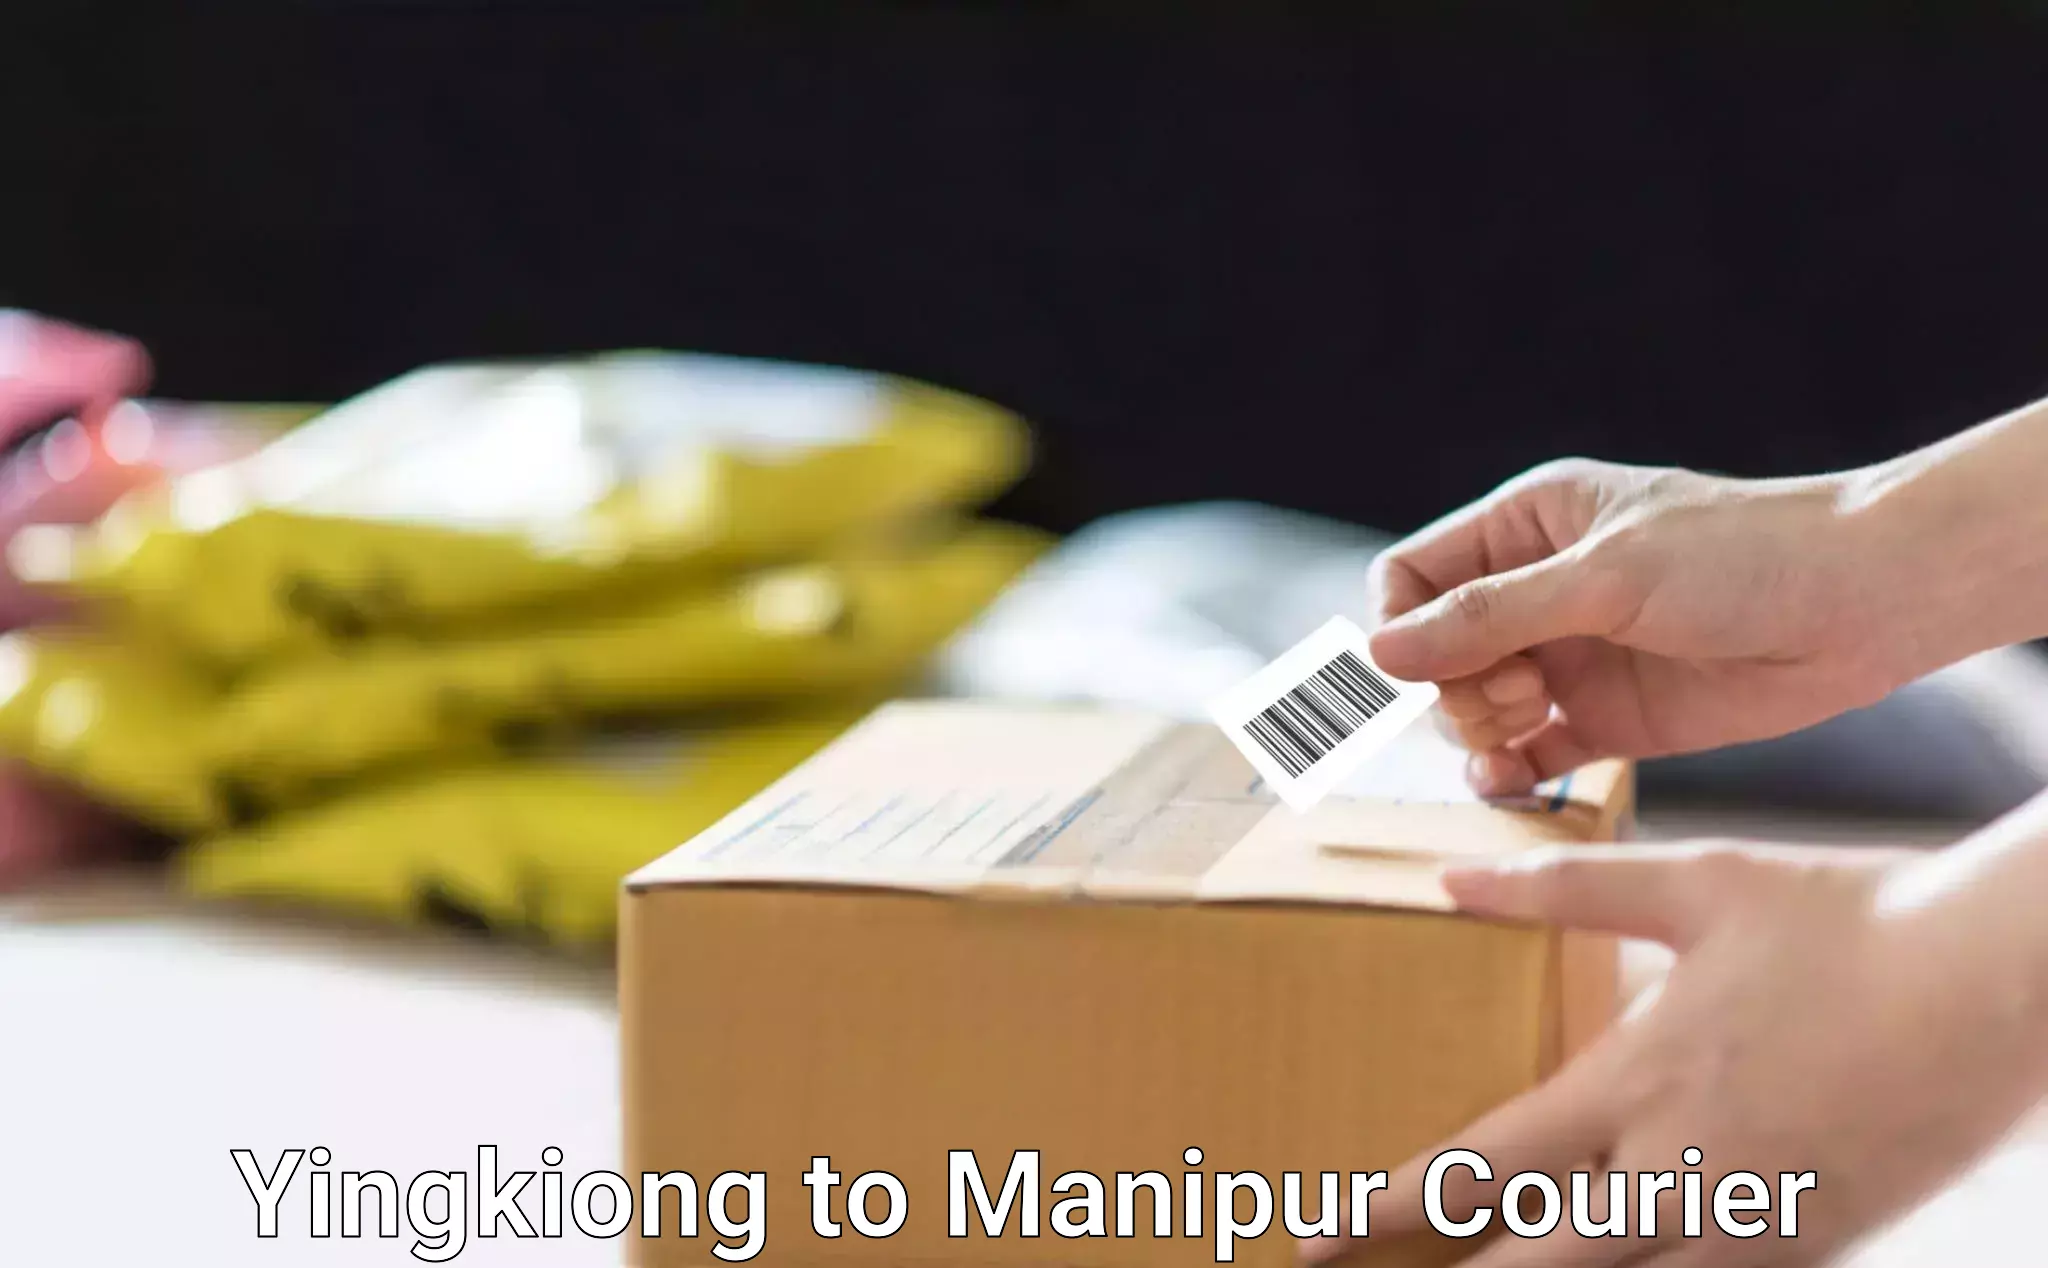 Premium delivery services Yingkiong to Manipur